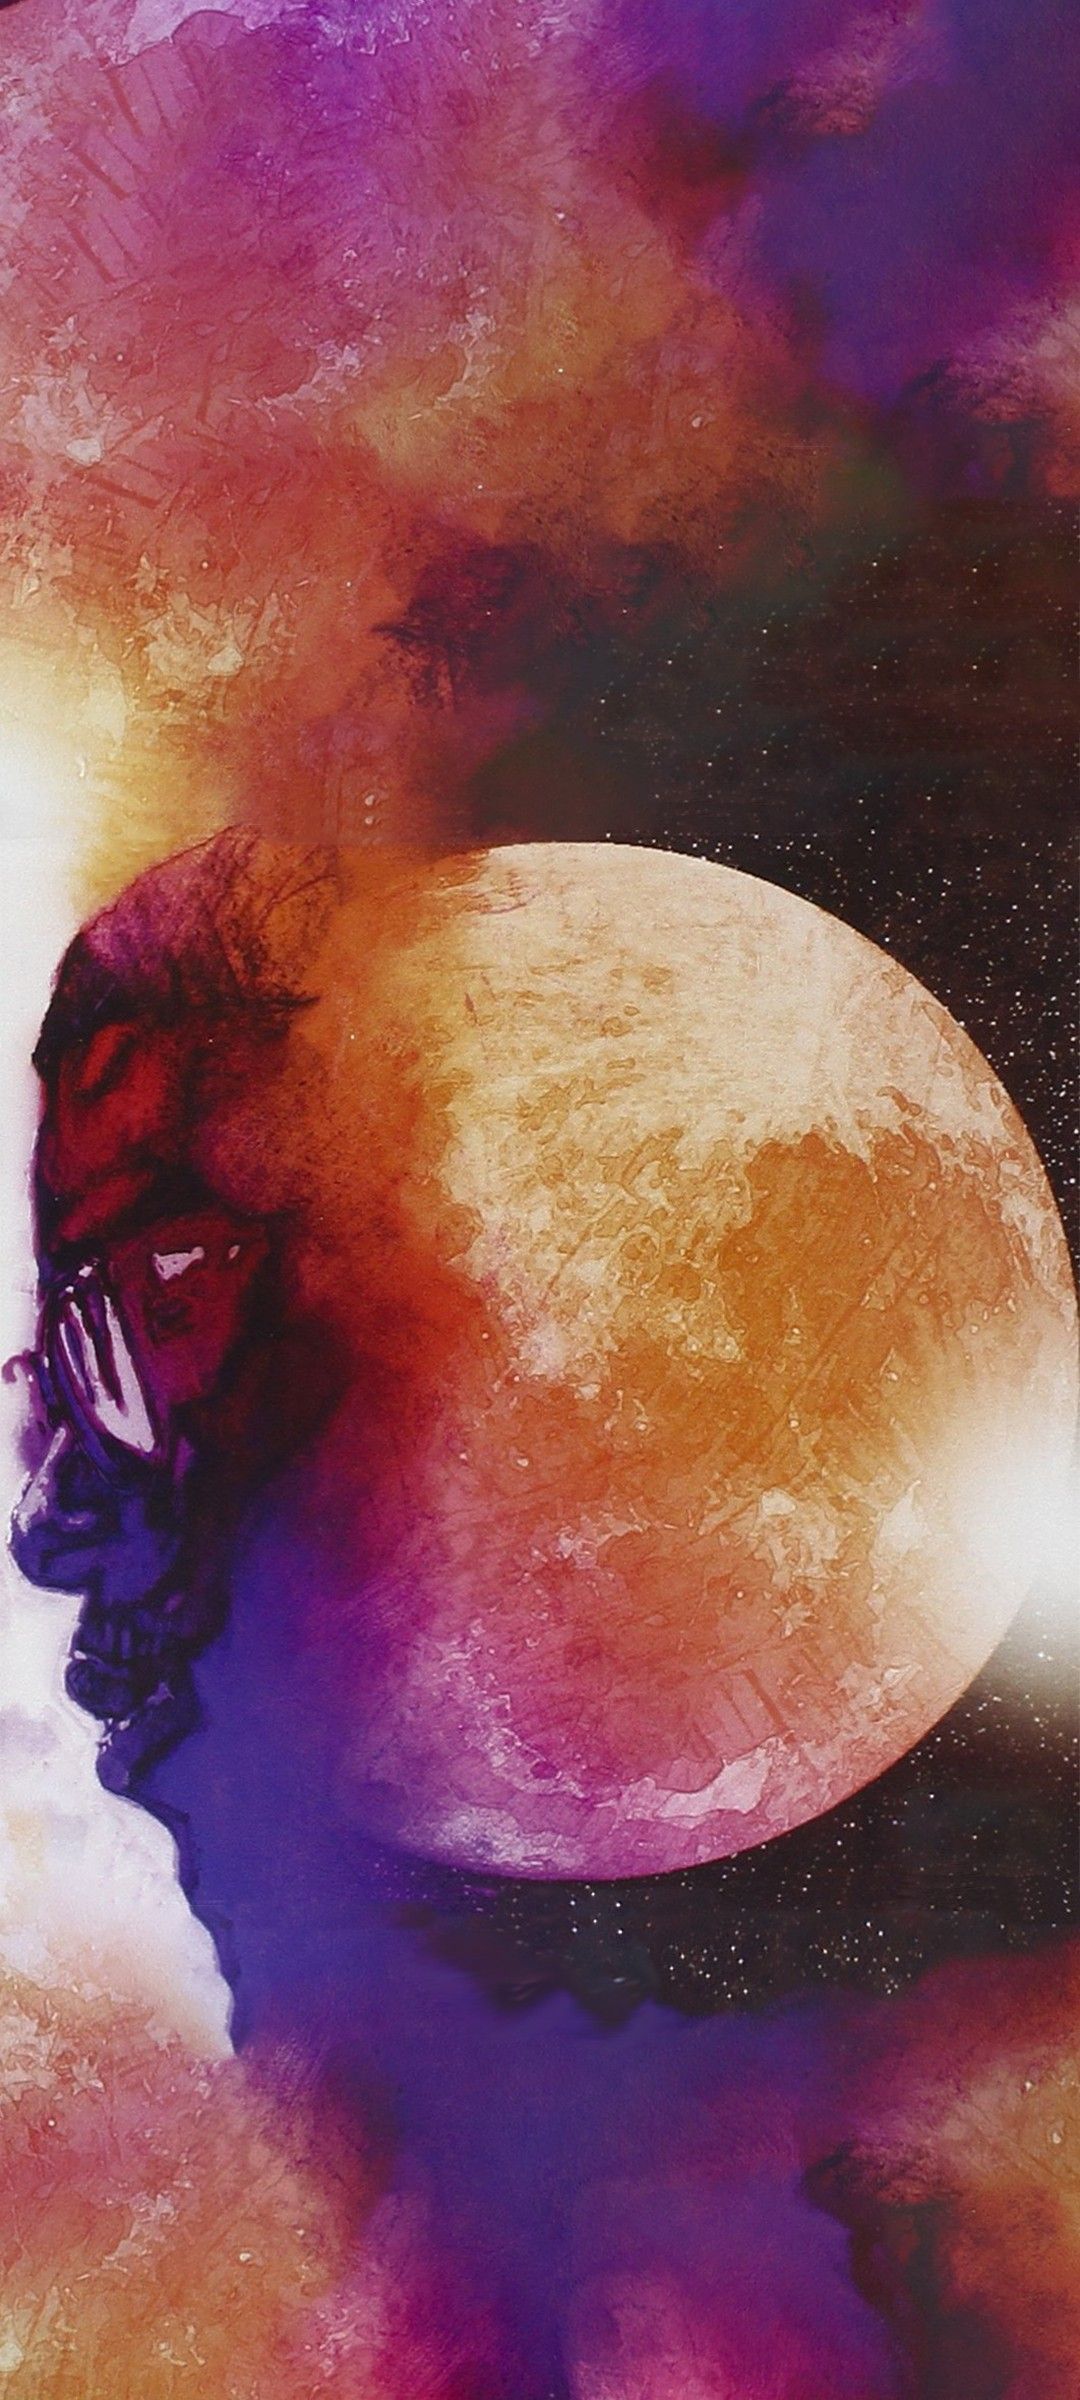 Man on The Moon 3 Kid Cudi Wallpaper for mobile phone tablet